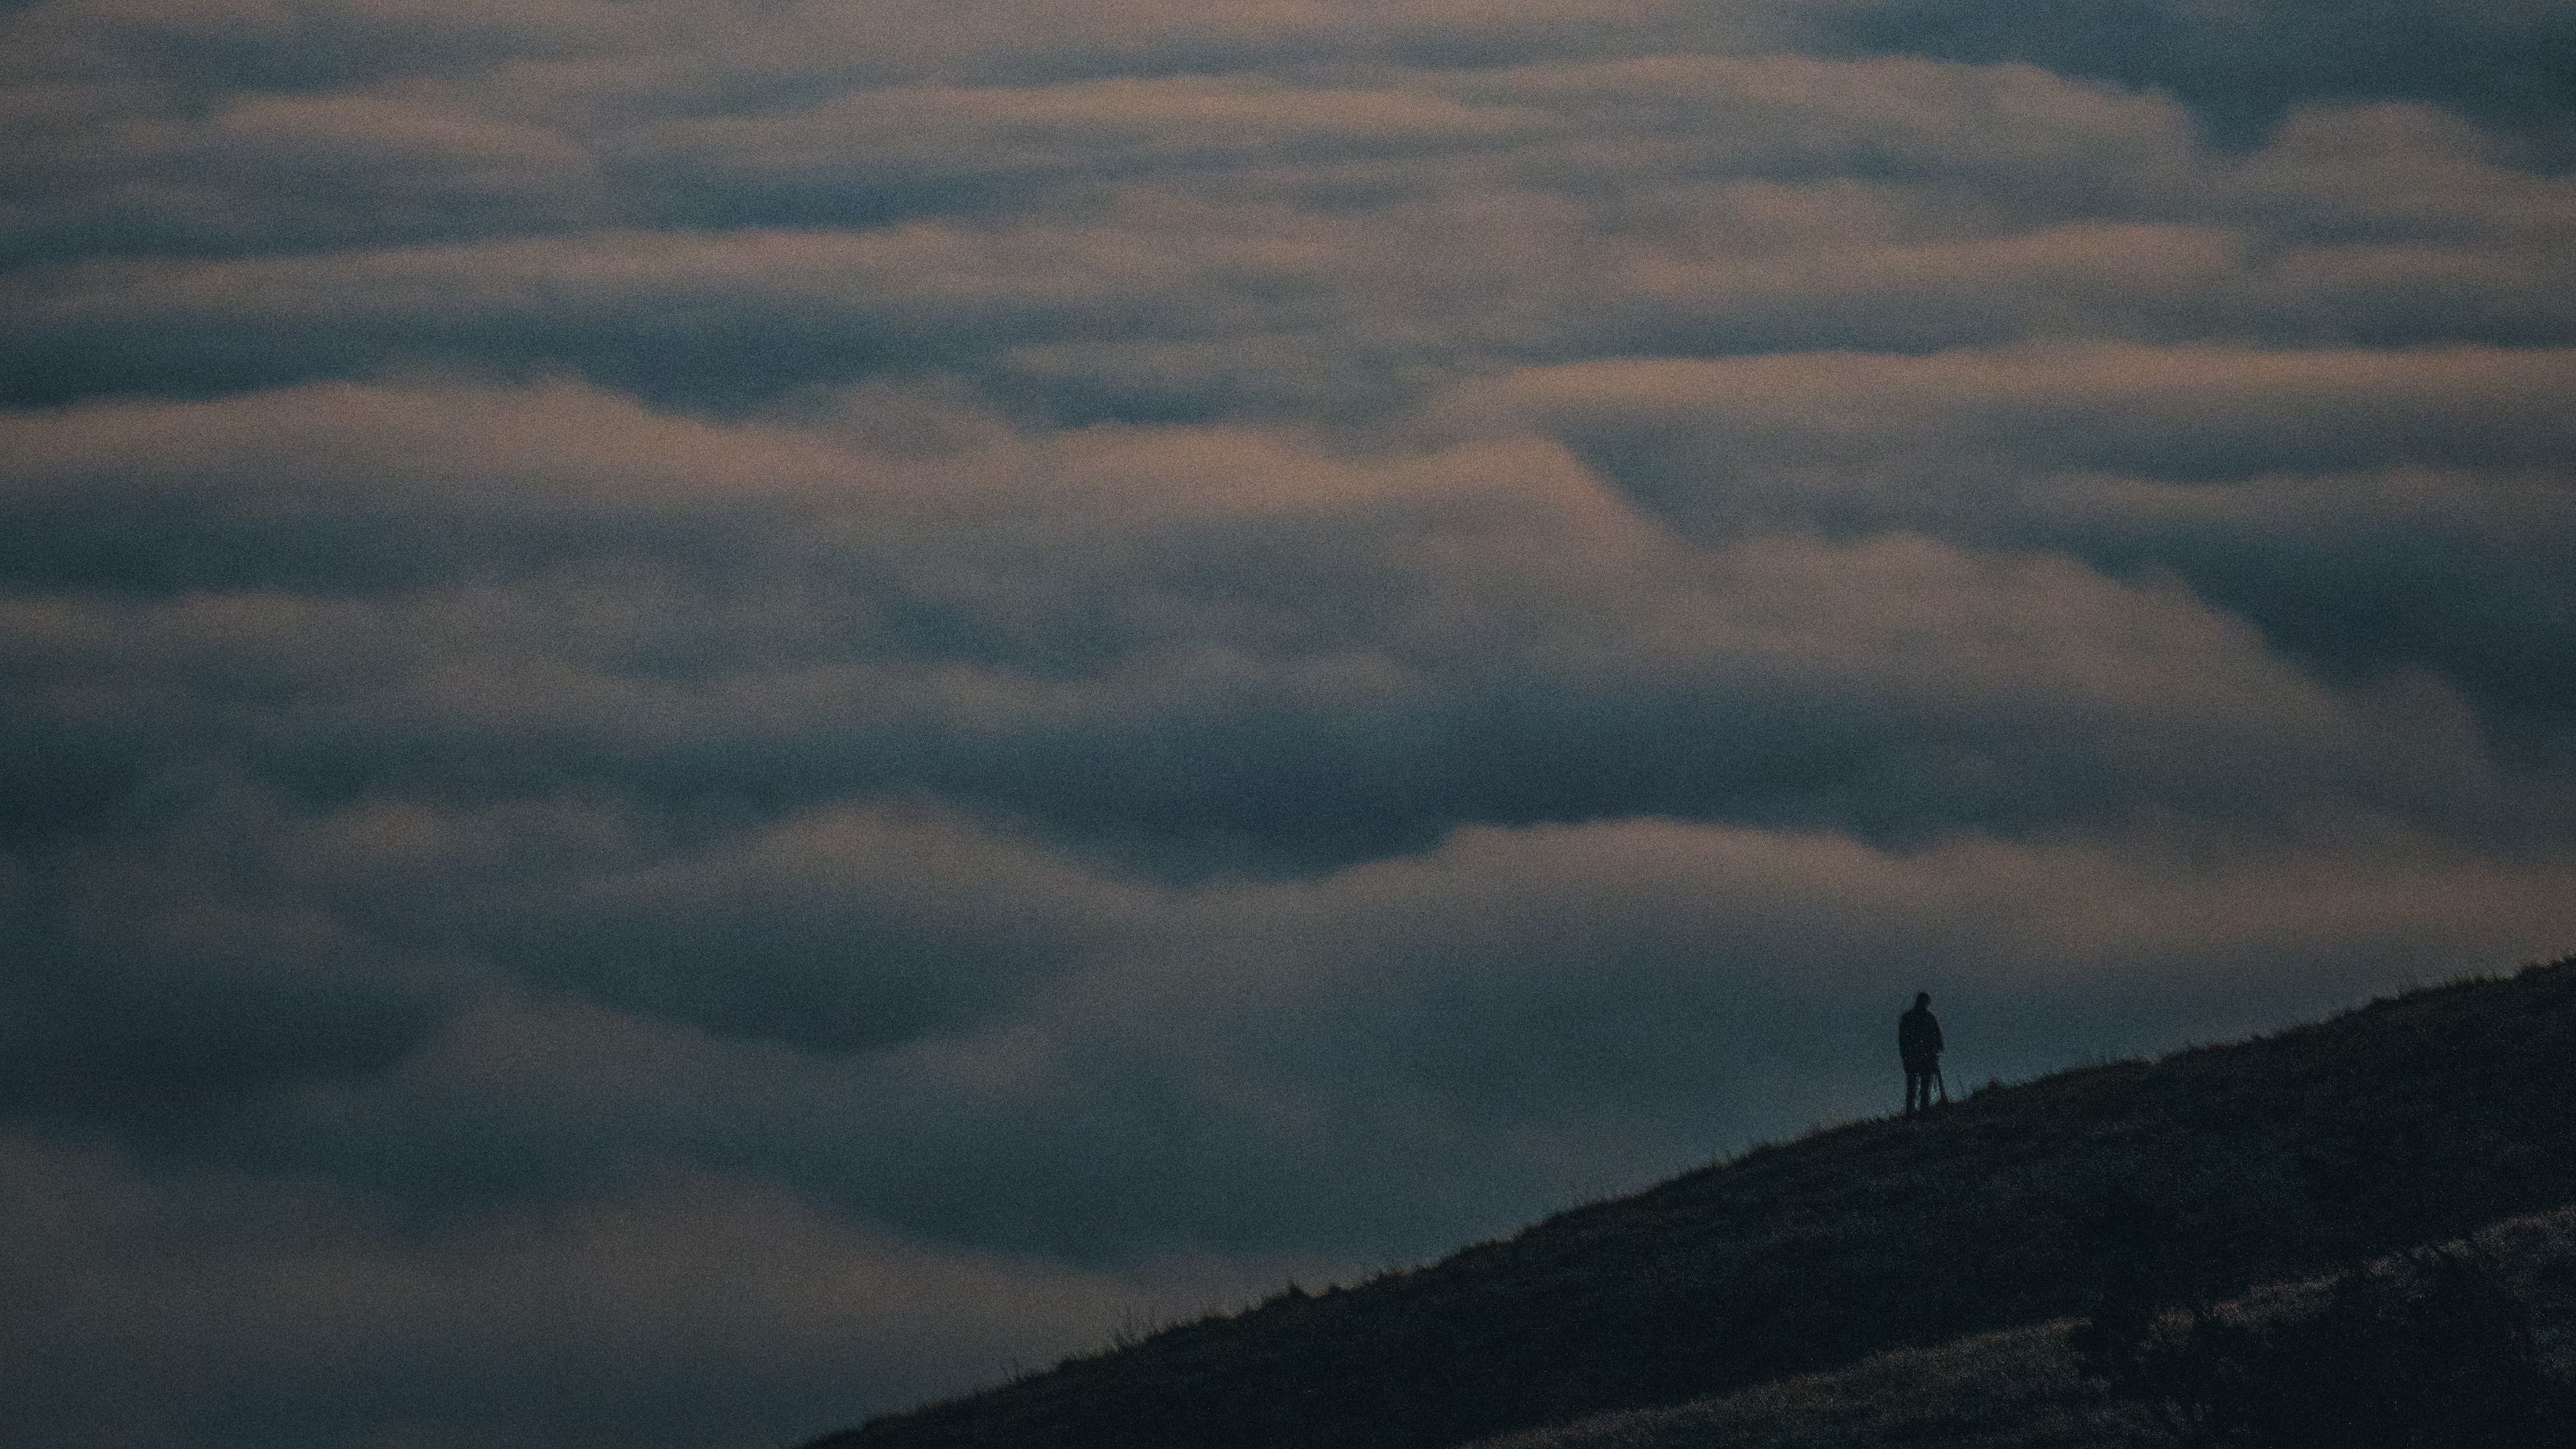 Download wallpaper 3840x2160 loneliness, alone, clouds, hill, distance ...